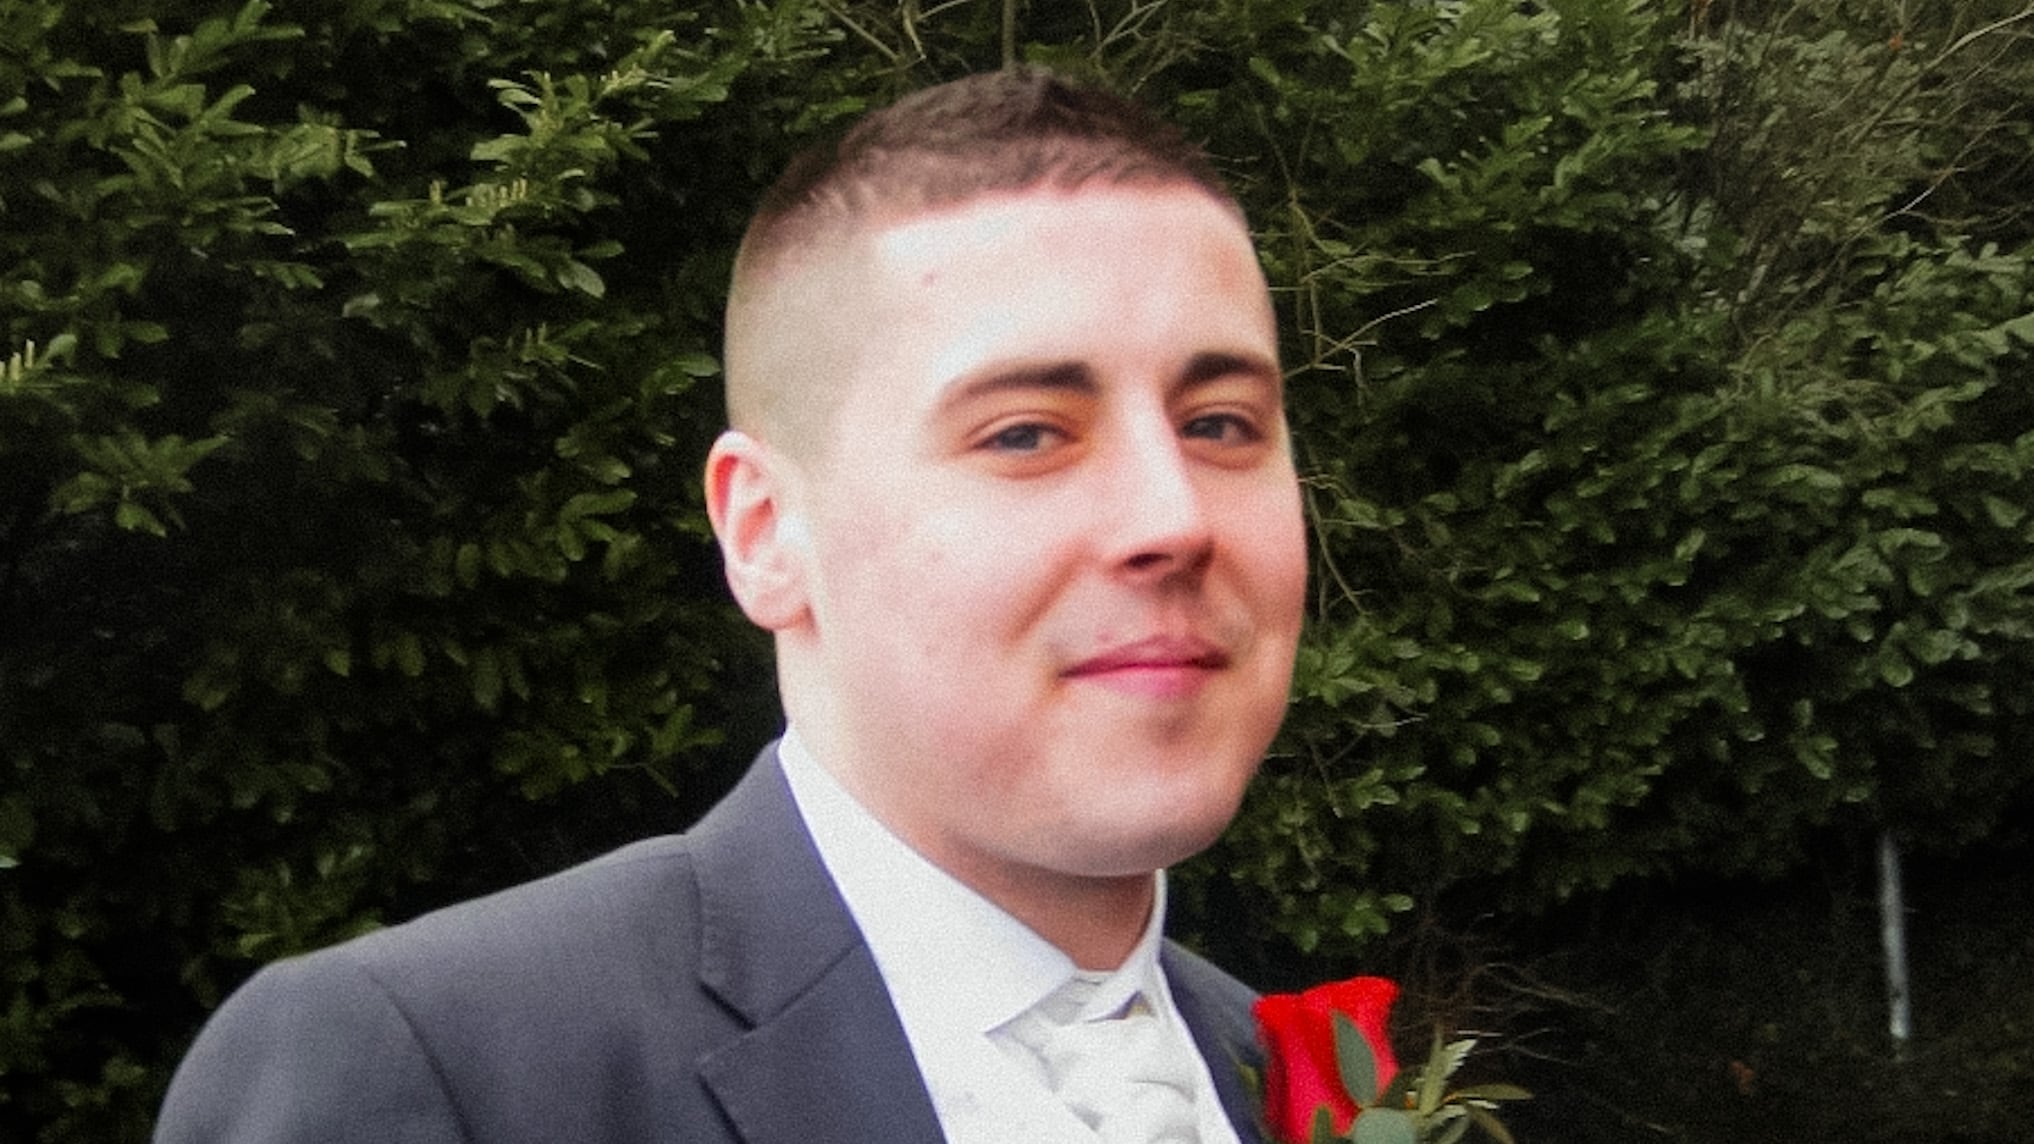 23-year-old Joseph Burns suffered a sudden cardiac arrest and later died in hospital